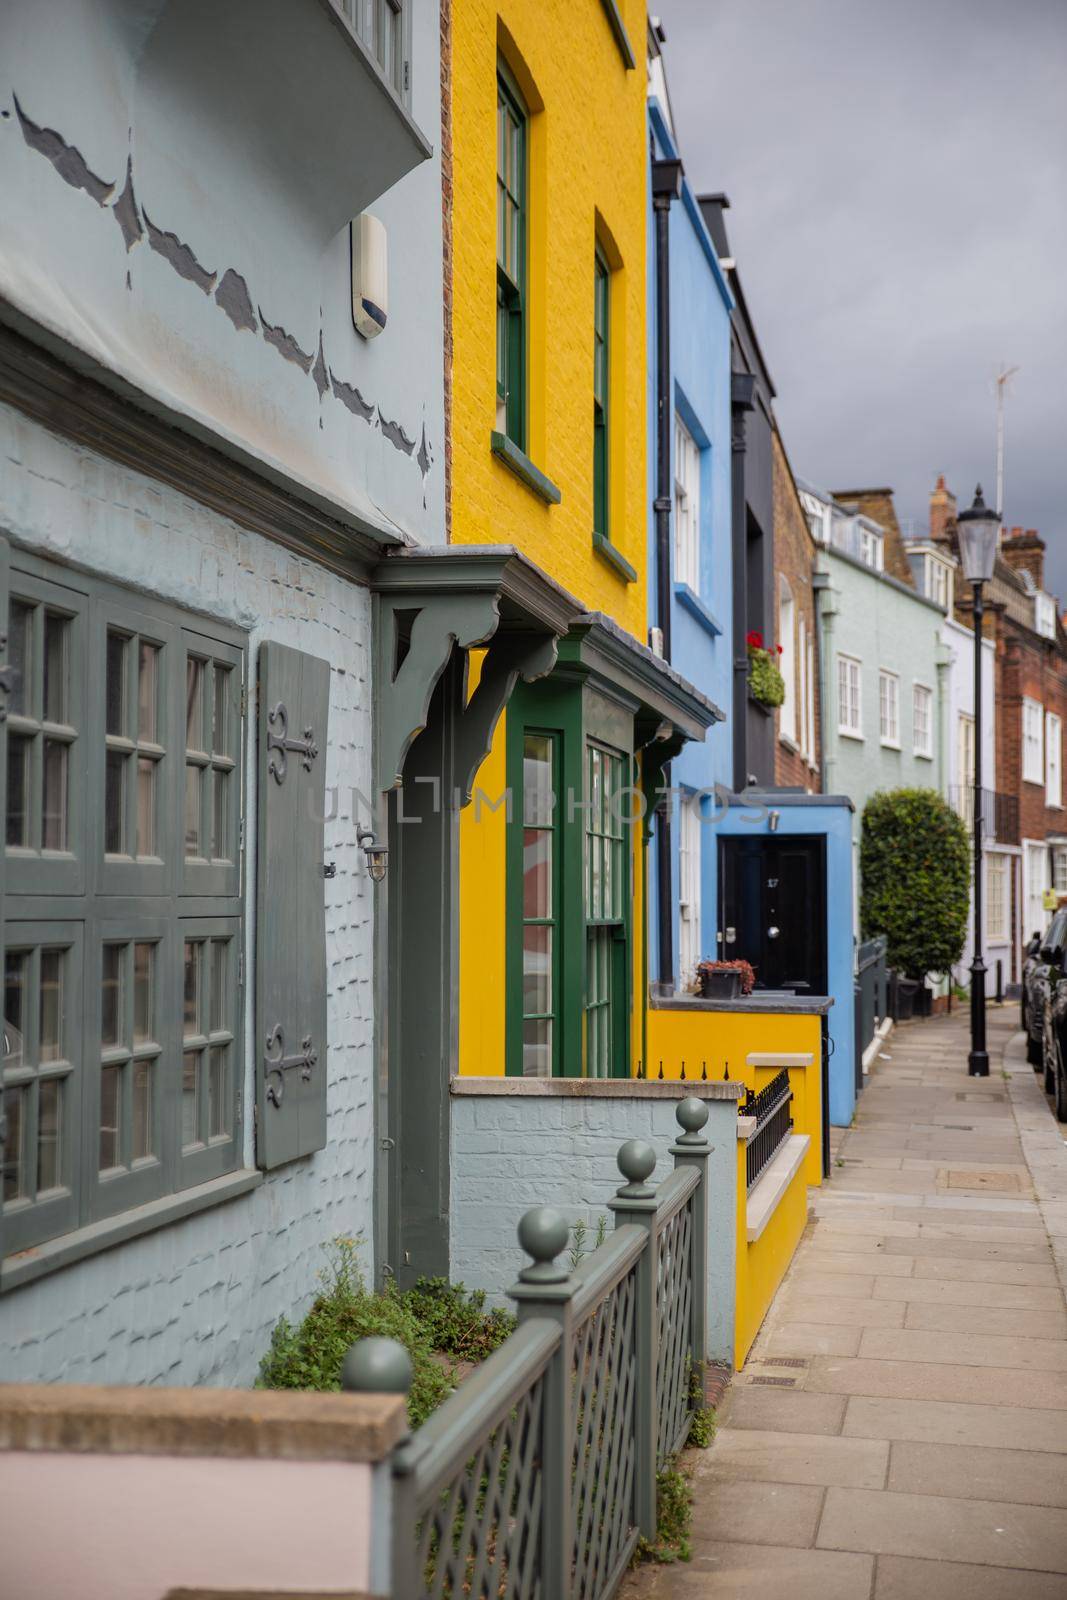 London, UK - February 14, 2020: Row of small colorful British houses with handrails and plants. Beautiful bright color English houses with victorian architecture. Peaceful London neighborhood